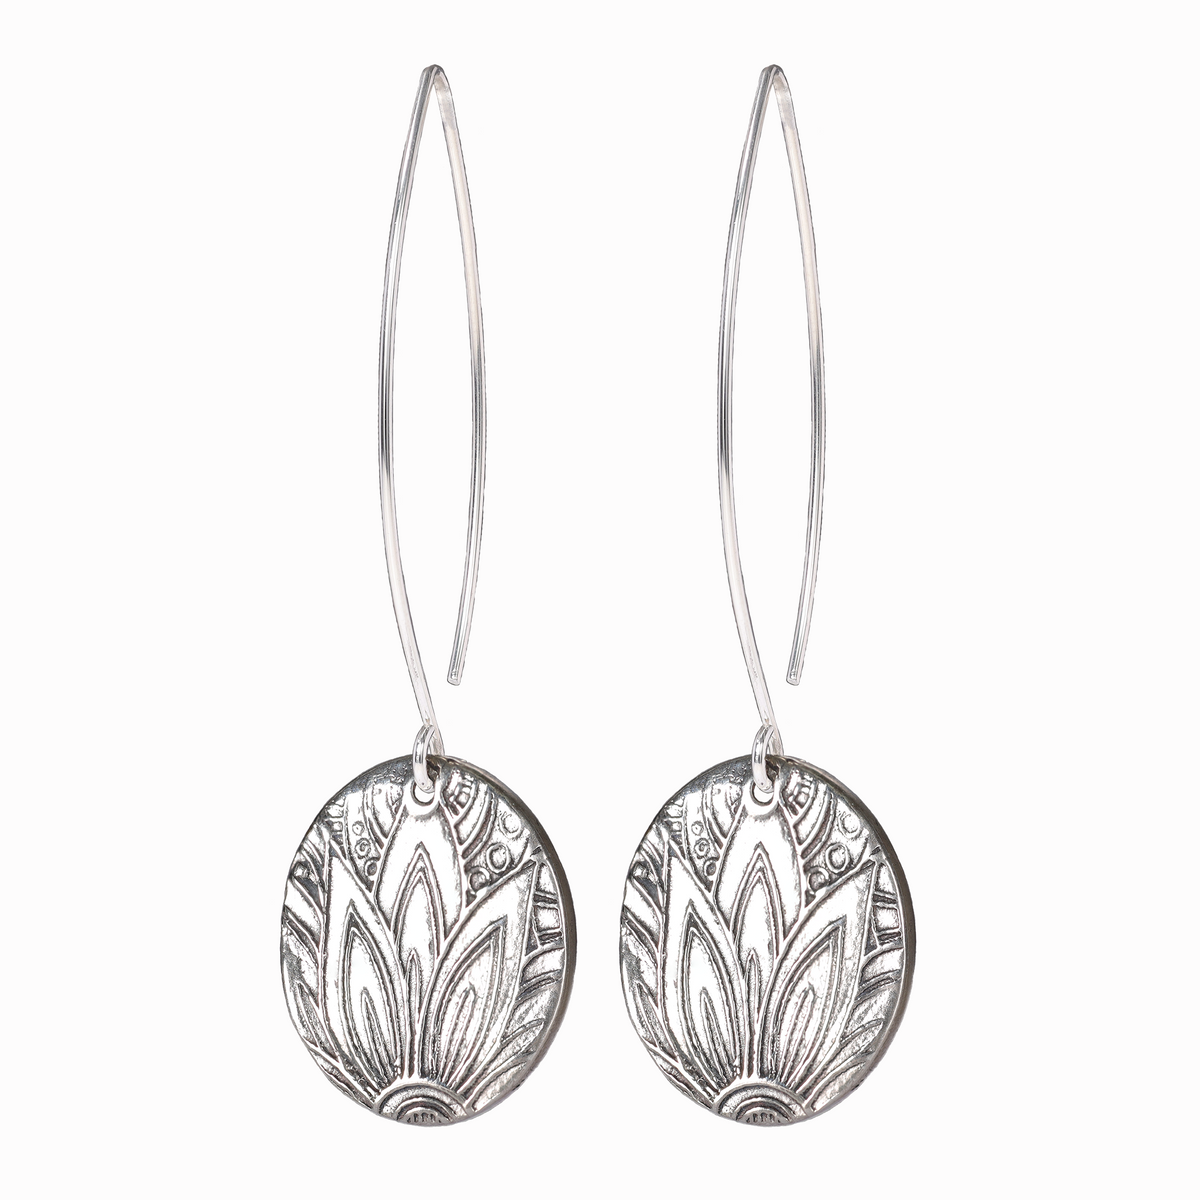 Agave Textured Large Sterling Silver Earrings on Long Ear Wires